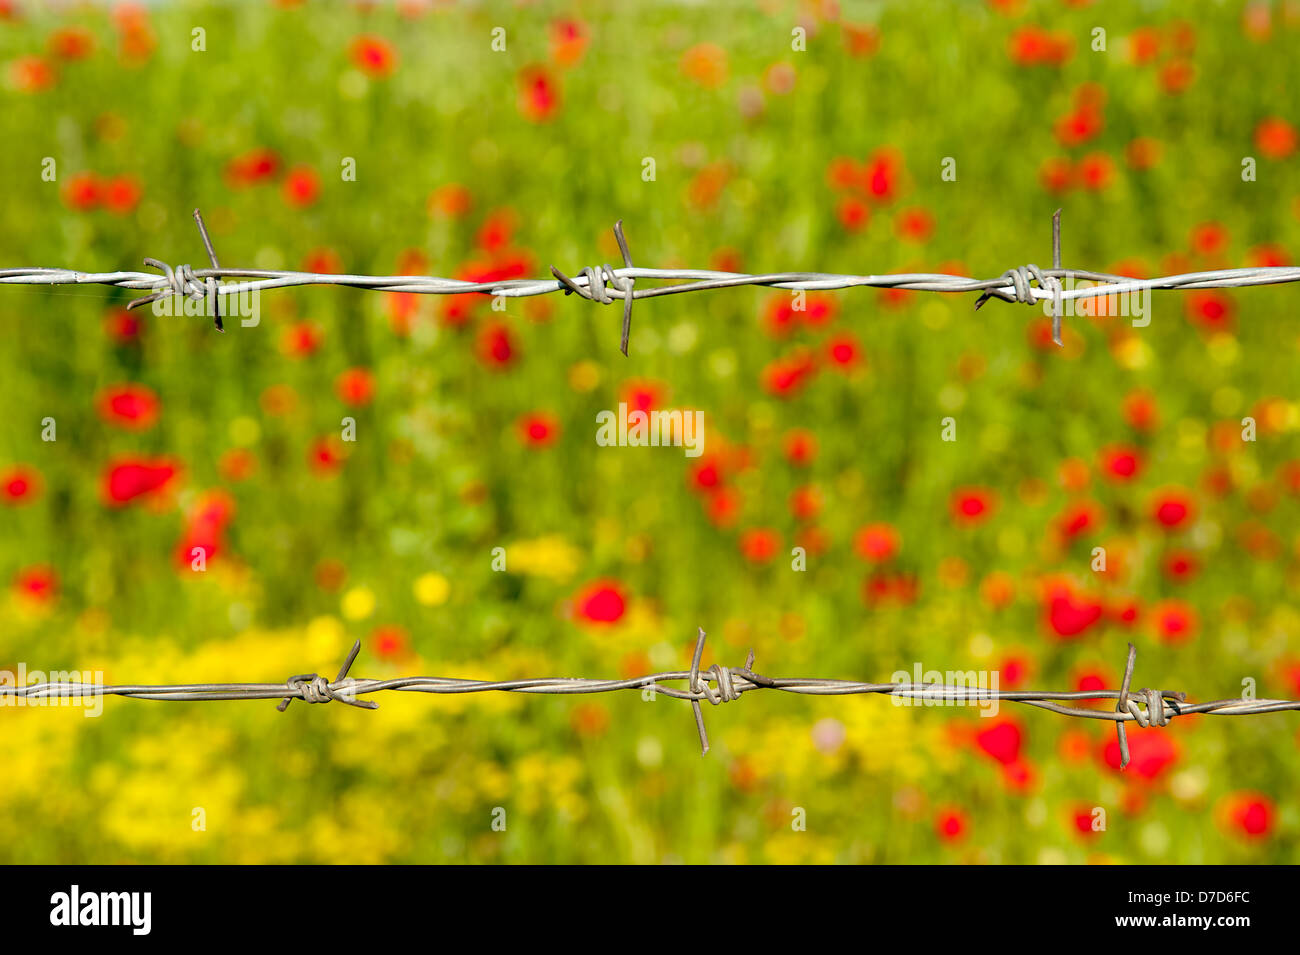 Barbed wire on colorful red poppies field Stock Photo